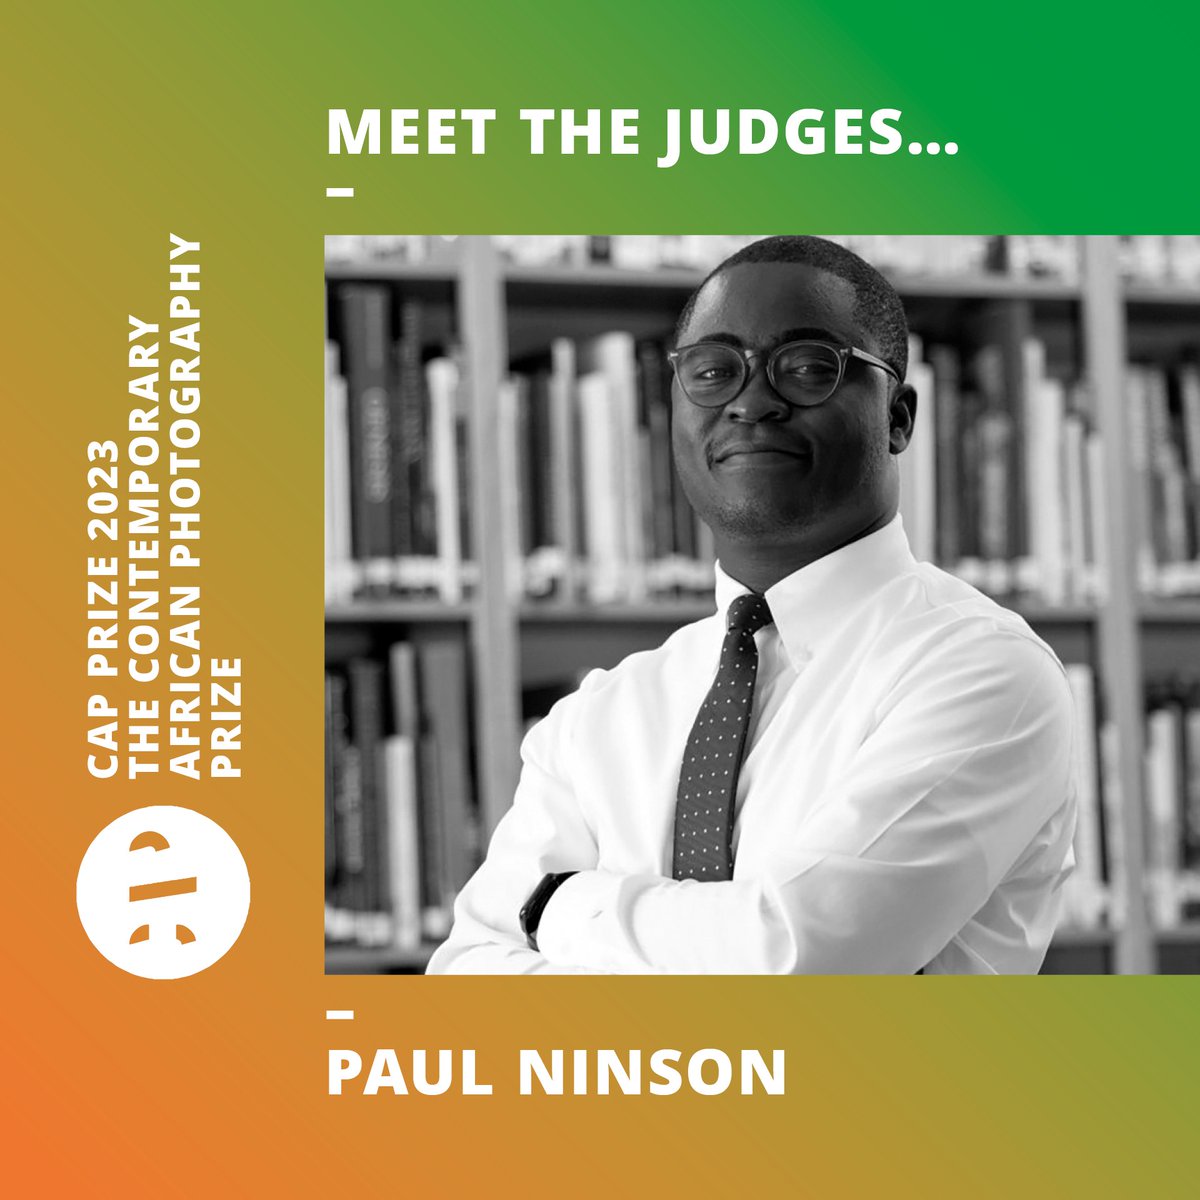 Meet the @CAP_Prize 2023 judges … – PaulNinson @p_ninson is the founding director at the @DikanCenter, a visual education centre in Accra, Ghana – Enter the CAP Prize until 7 Feb 2023 at application.capprize.com – #capprize #africanphotography #photographyaward #eigerfoundation